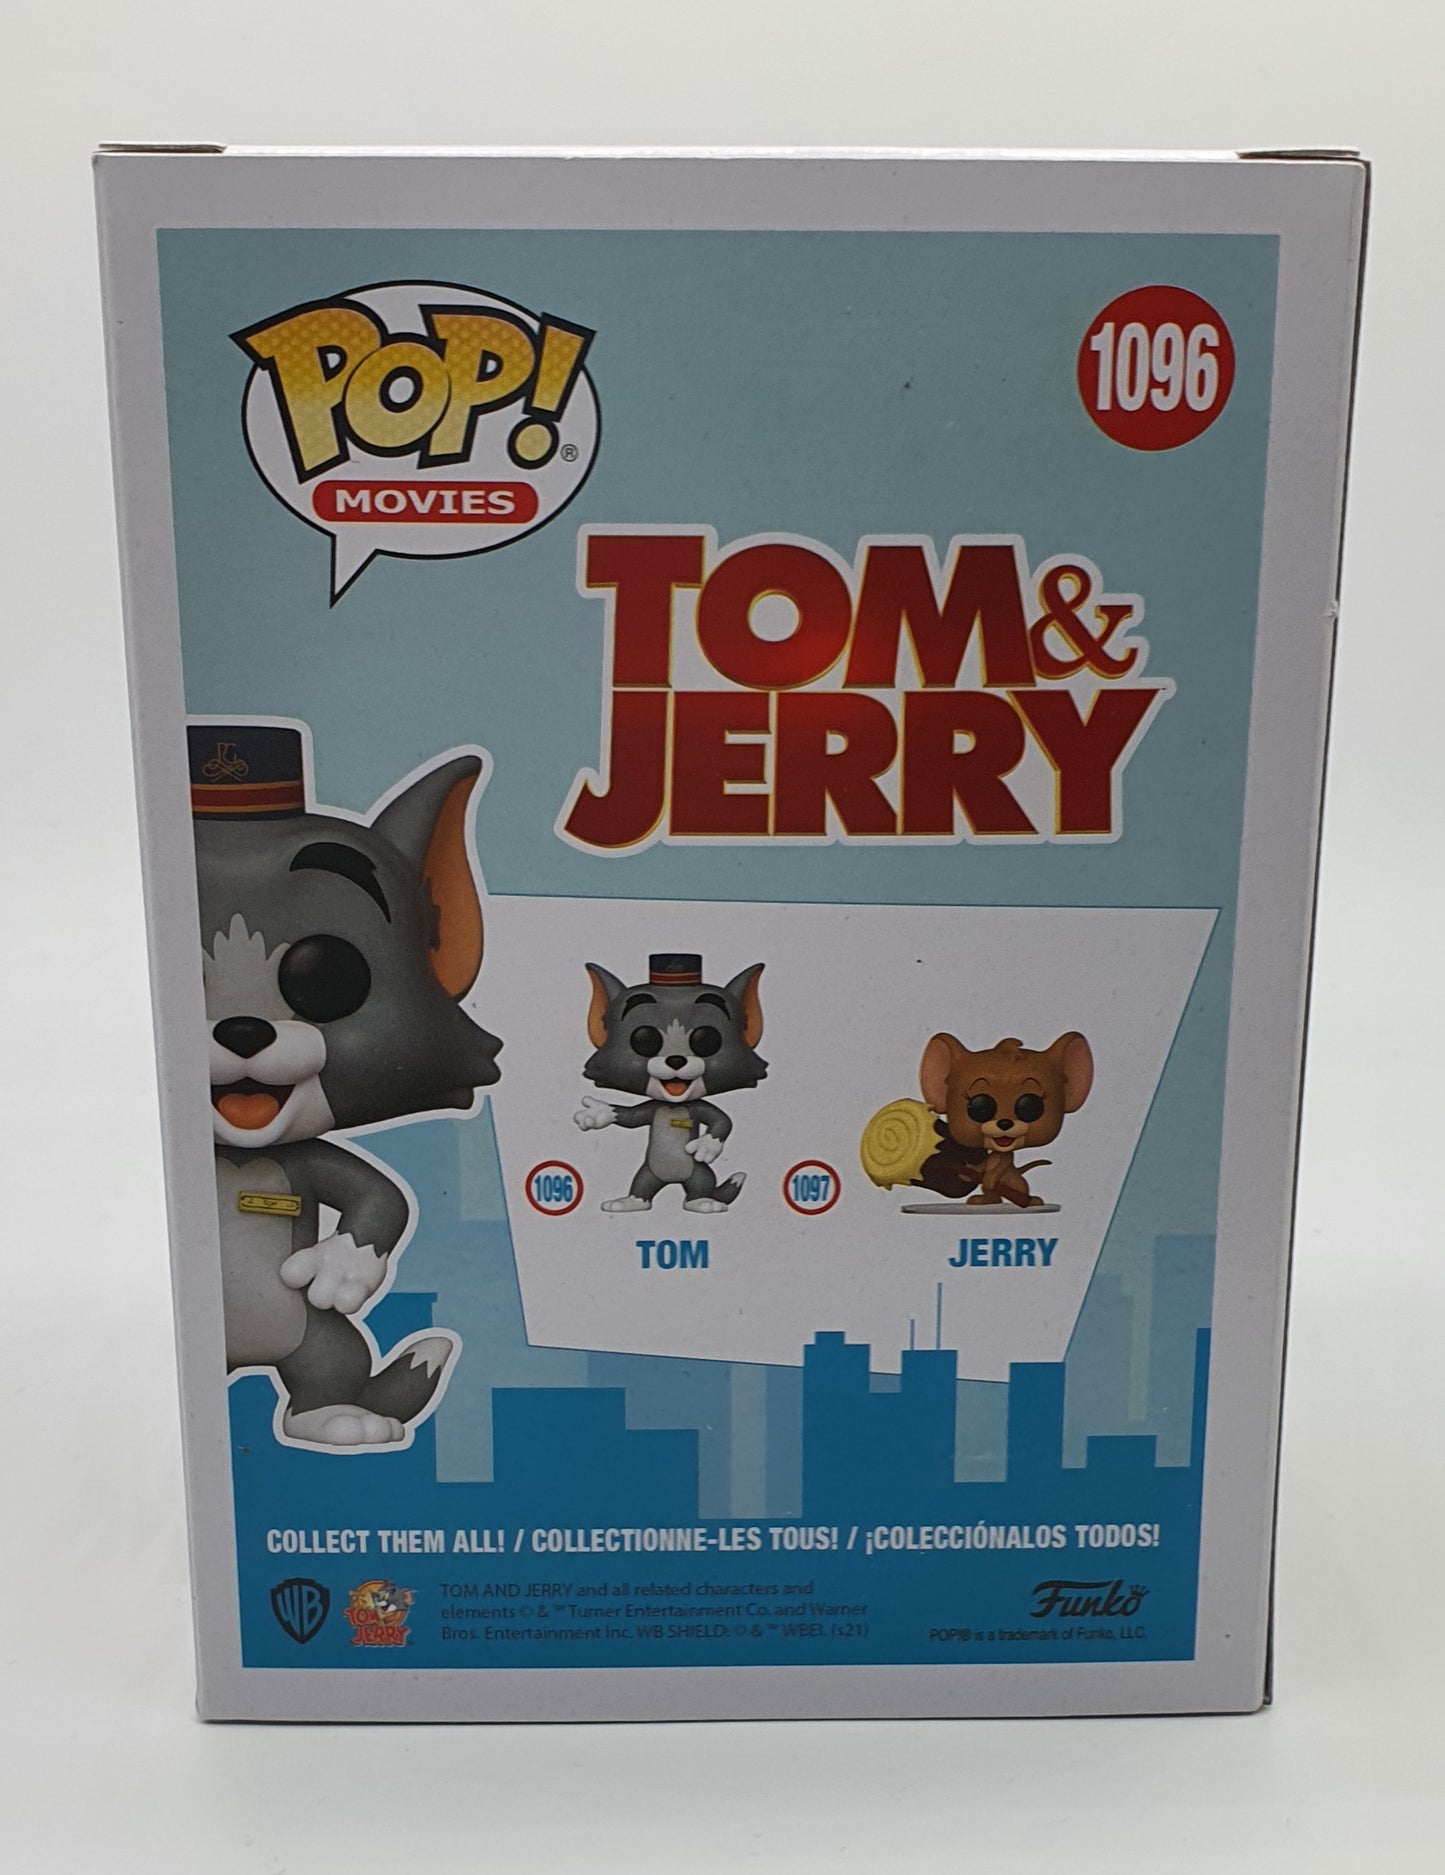 1096 - MOVIES - TOM AND JERRY - TOM